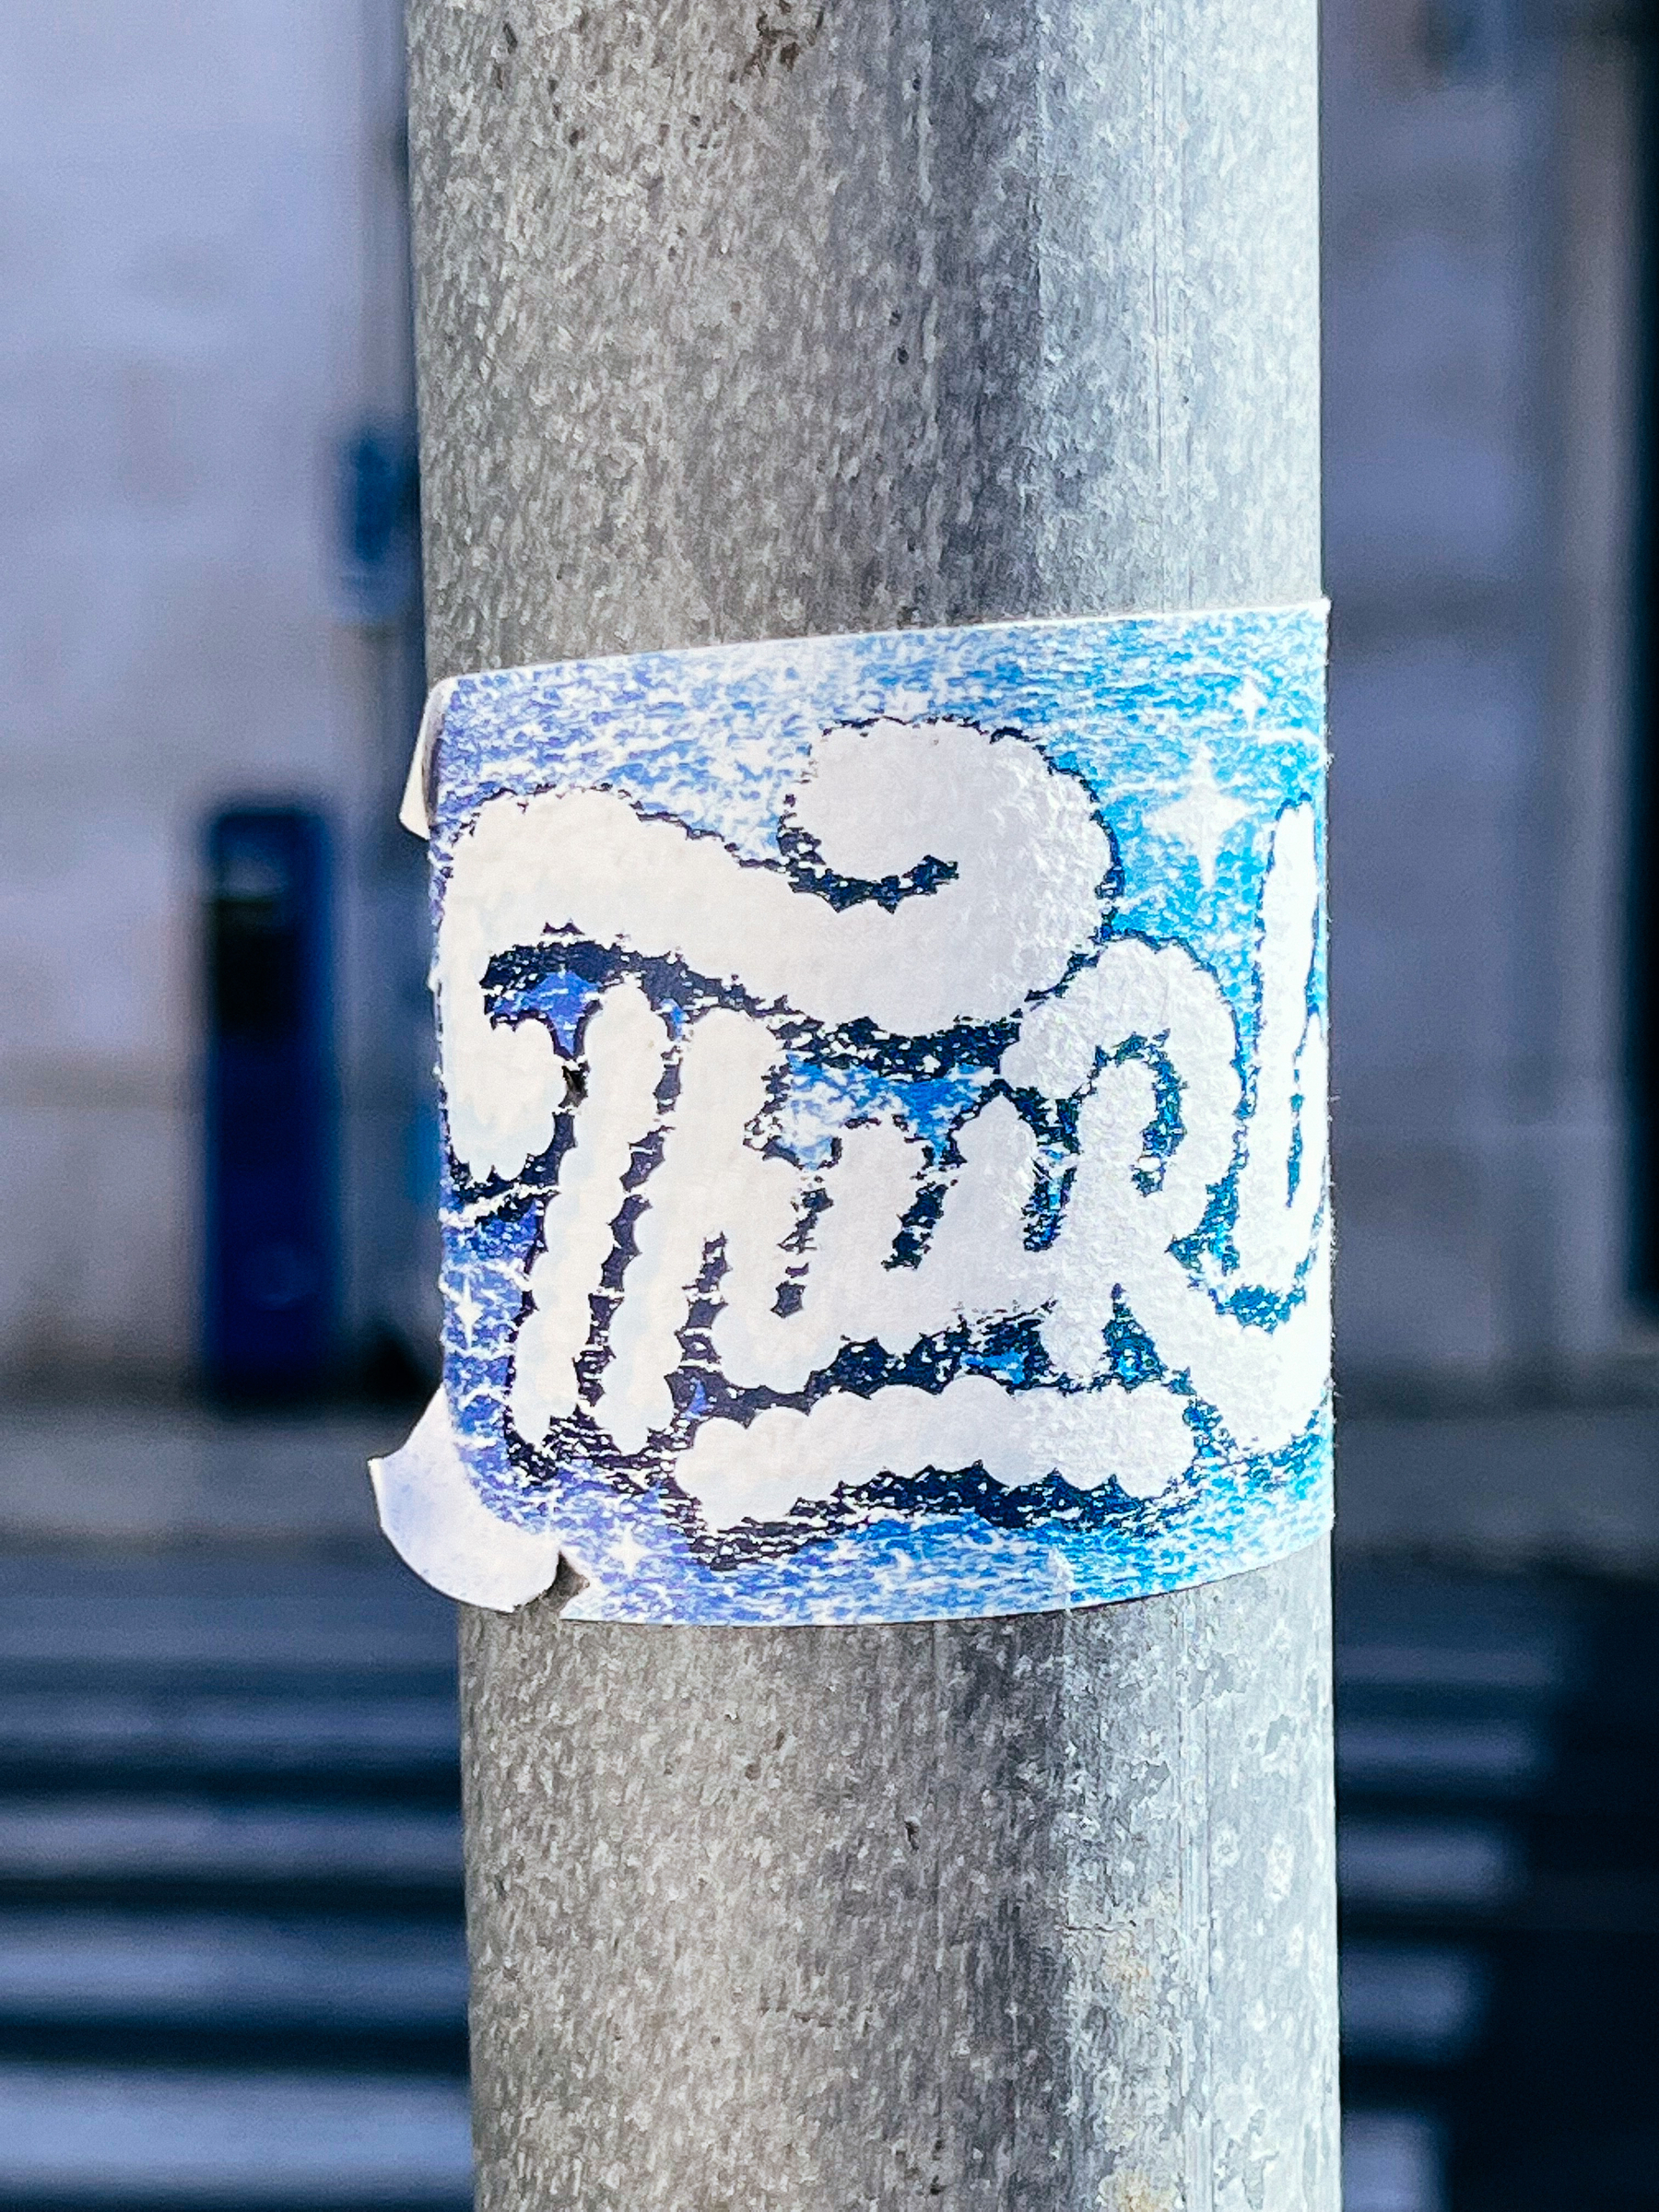 Sticker with a part of a word, “Thurb”, written in a font that looks like it’s made of clouds. 